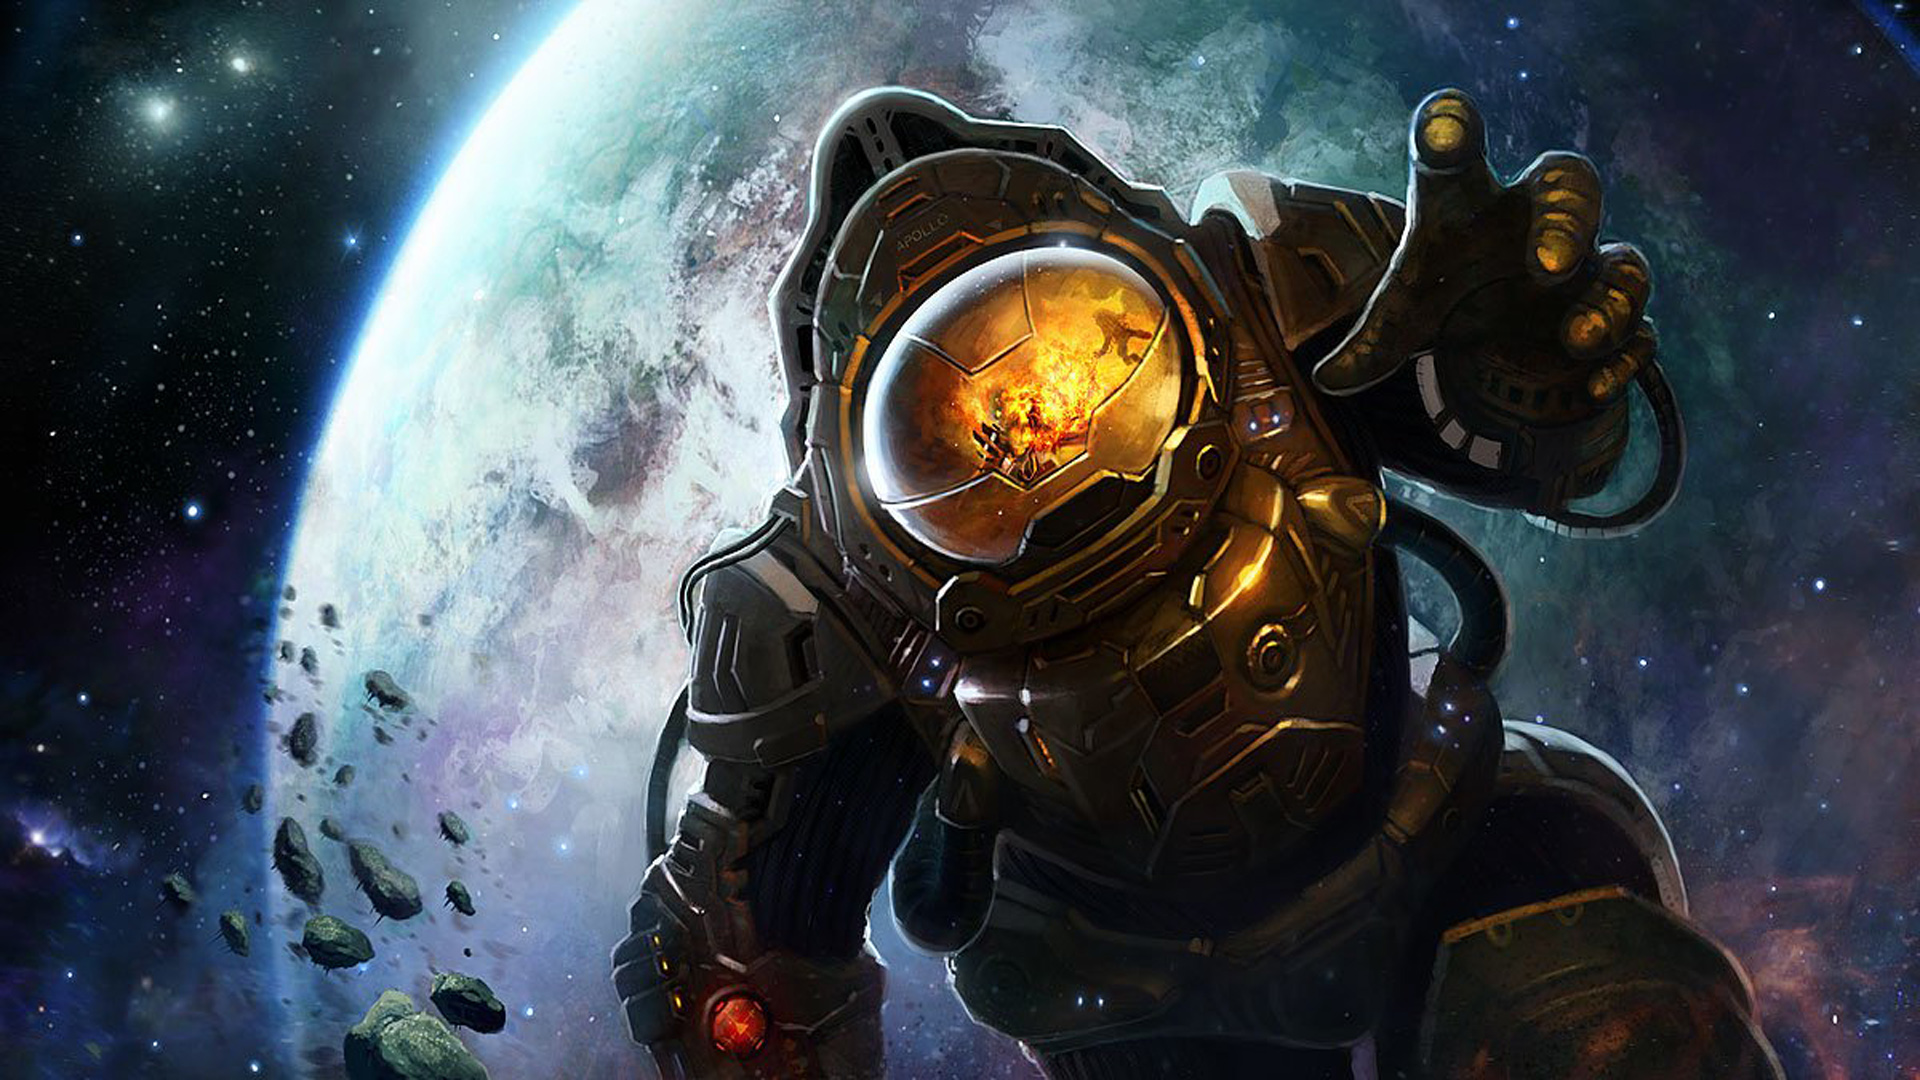 Astronaut In Space Explosion - HD Wallpaper 